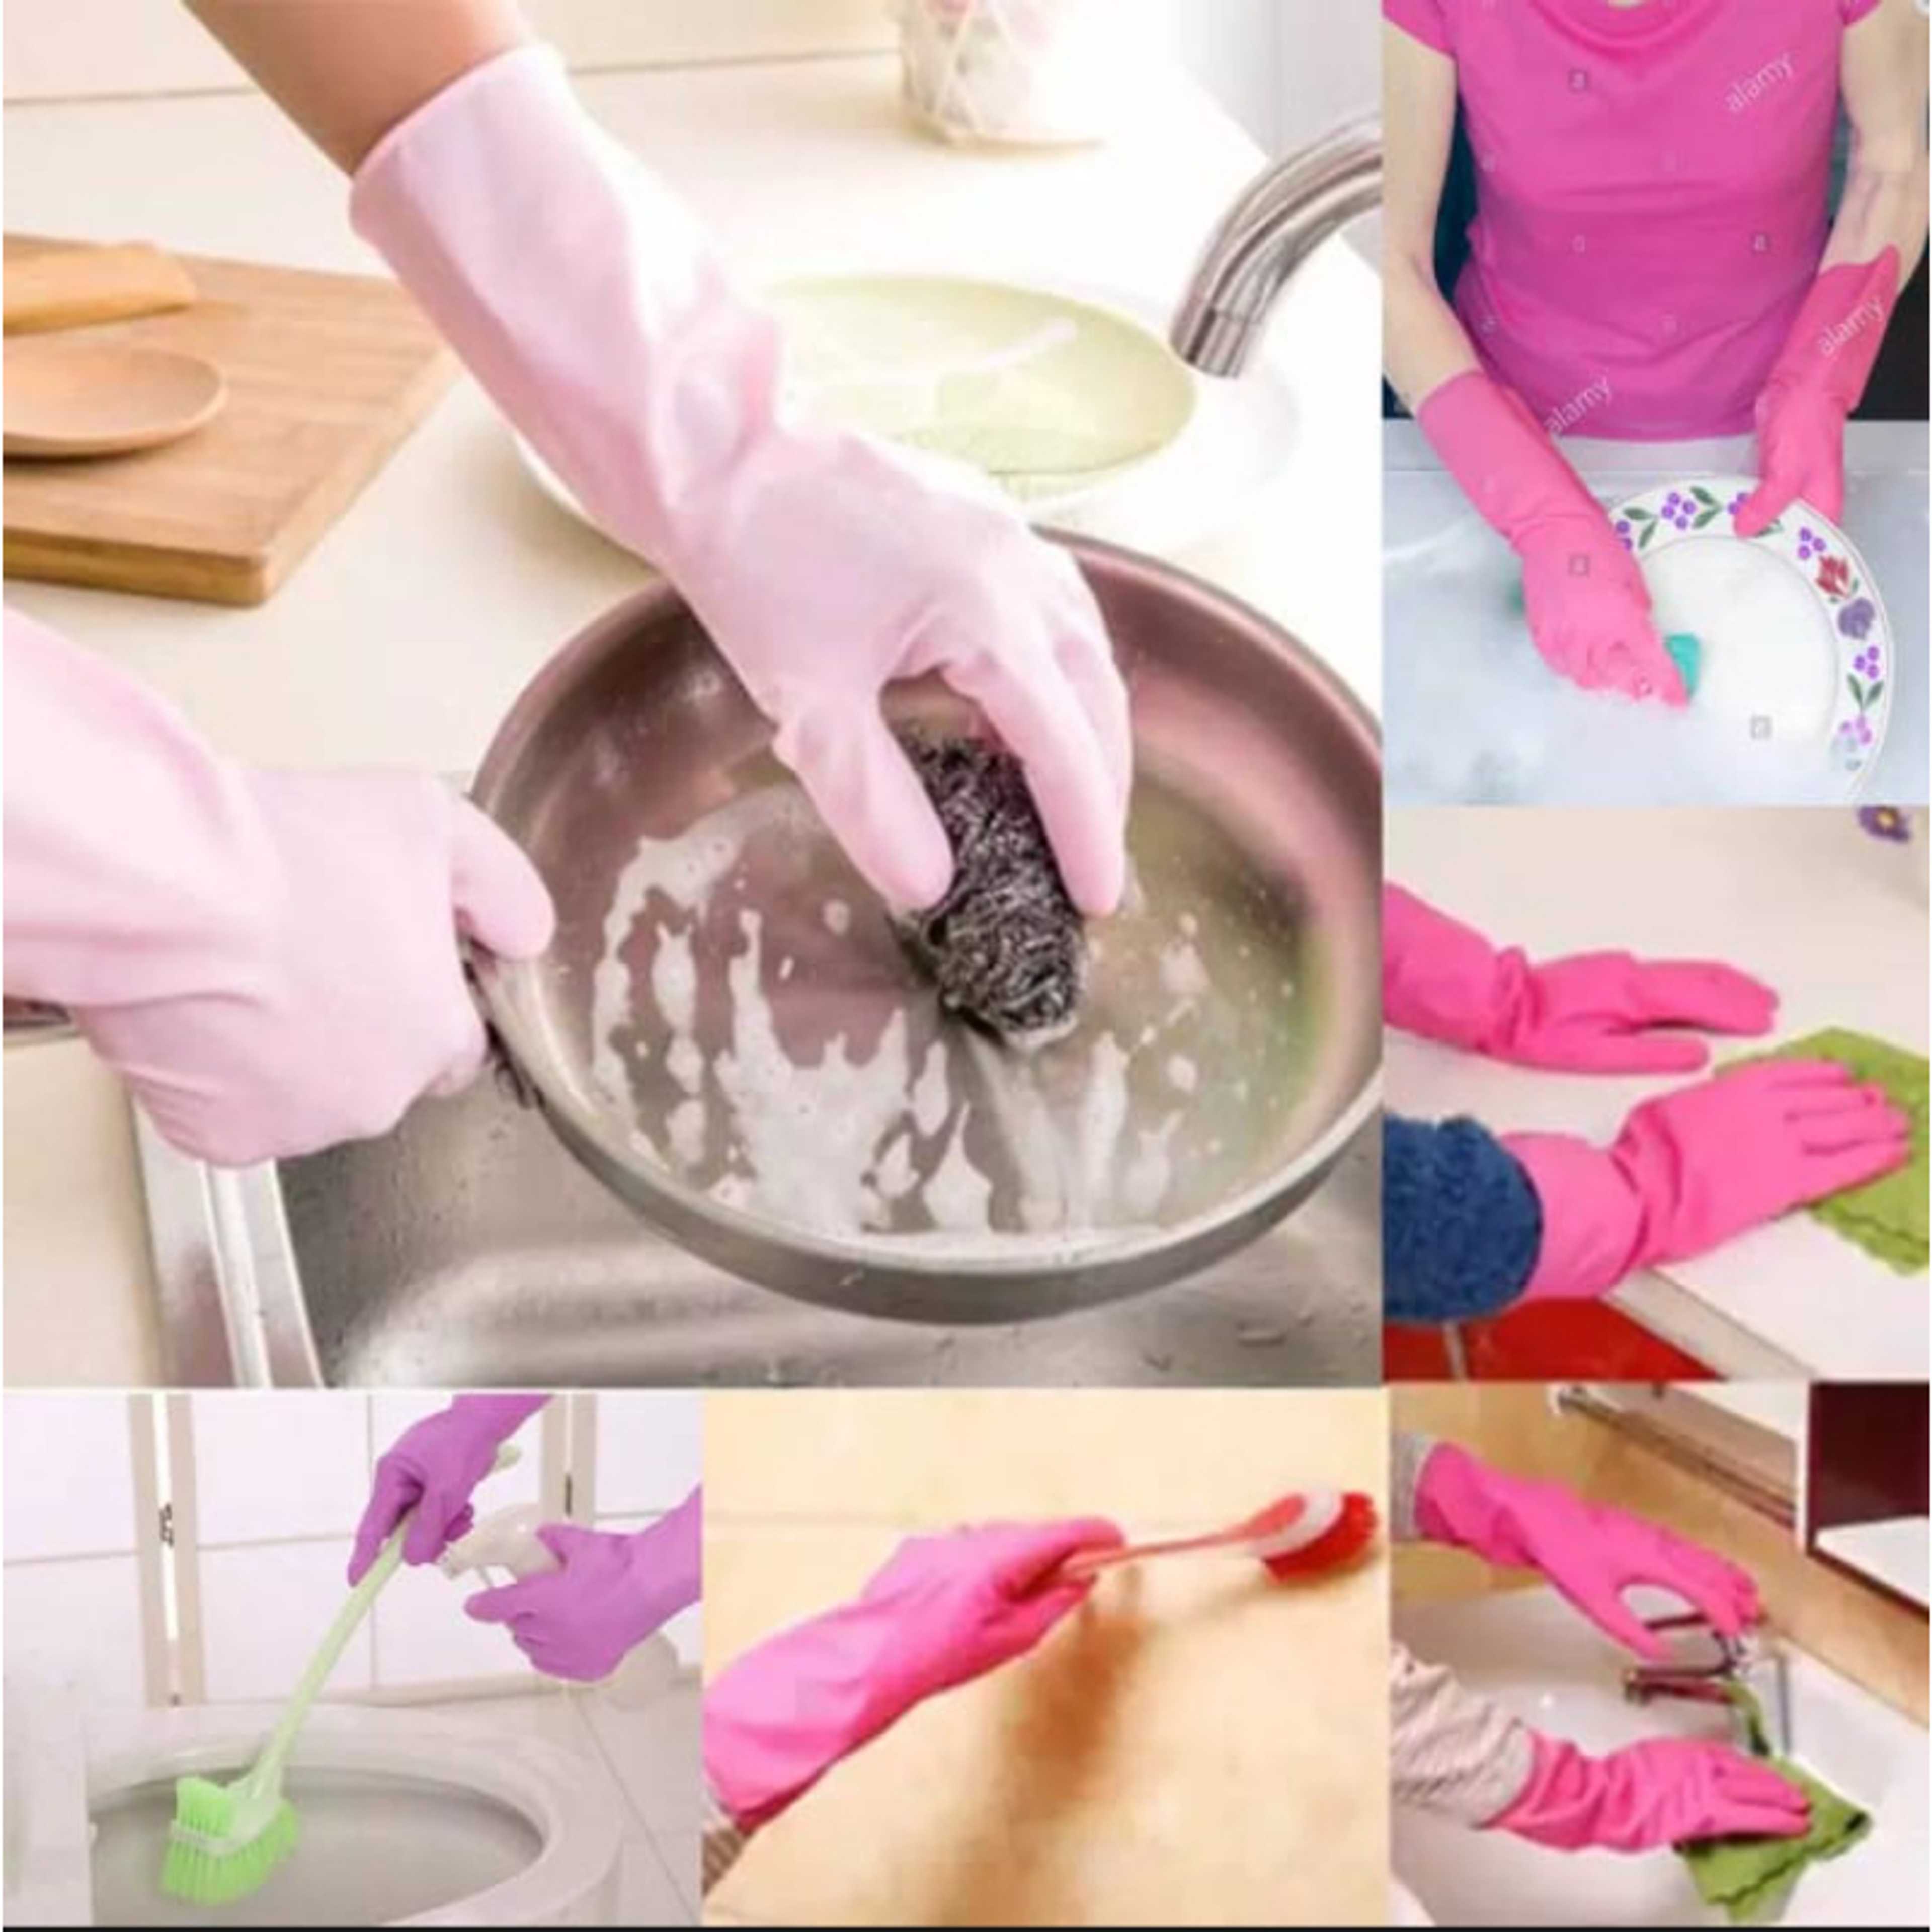 Fine Quality Nice Finishing Long Lasting Rubber Gloves for cleaning & Kitchen Household Waterproof Rubber Durable Suitable for Washing Dishes